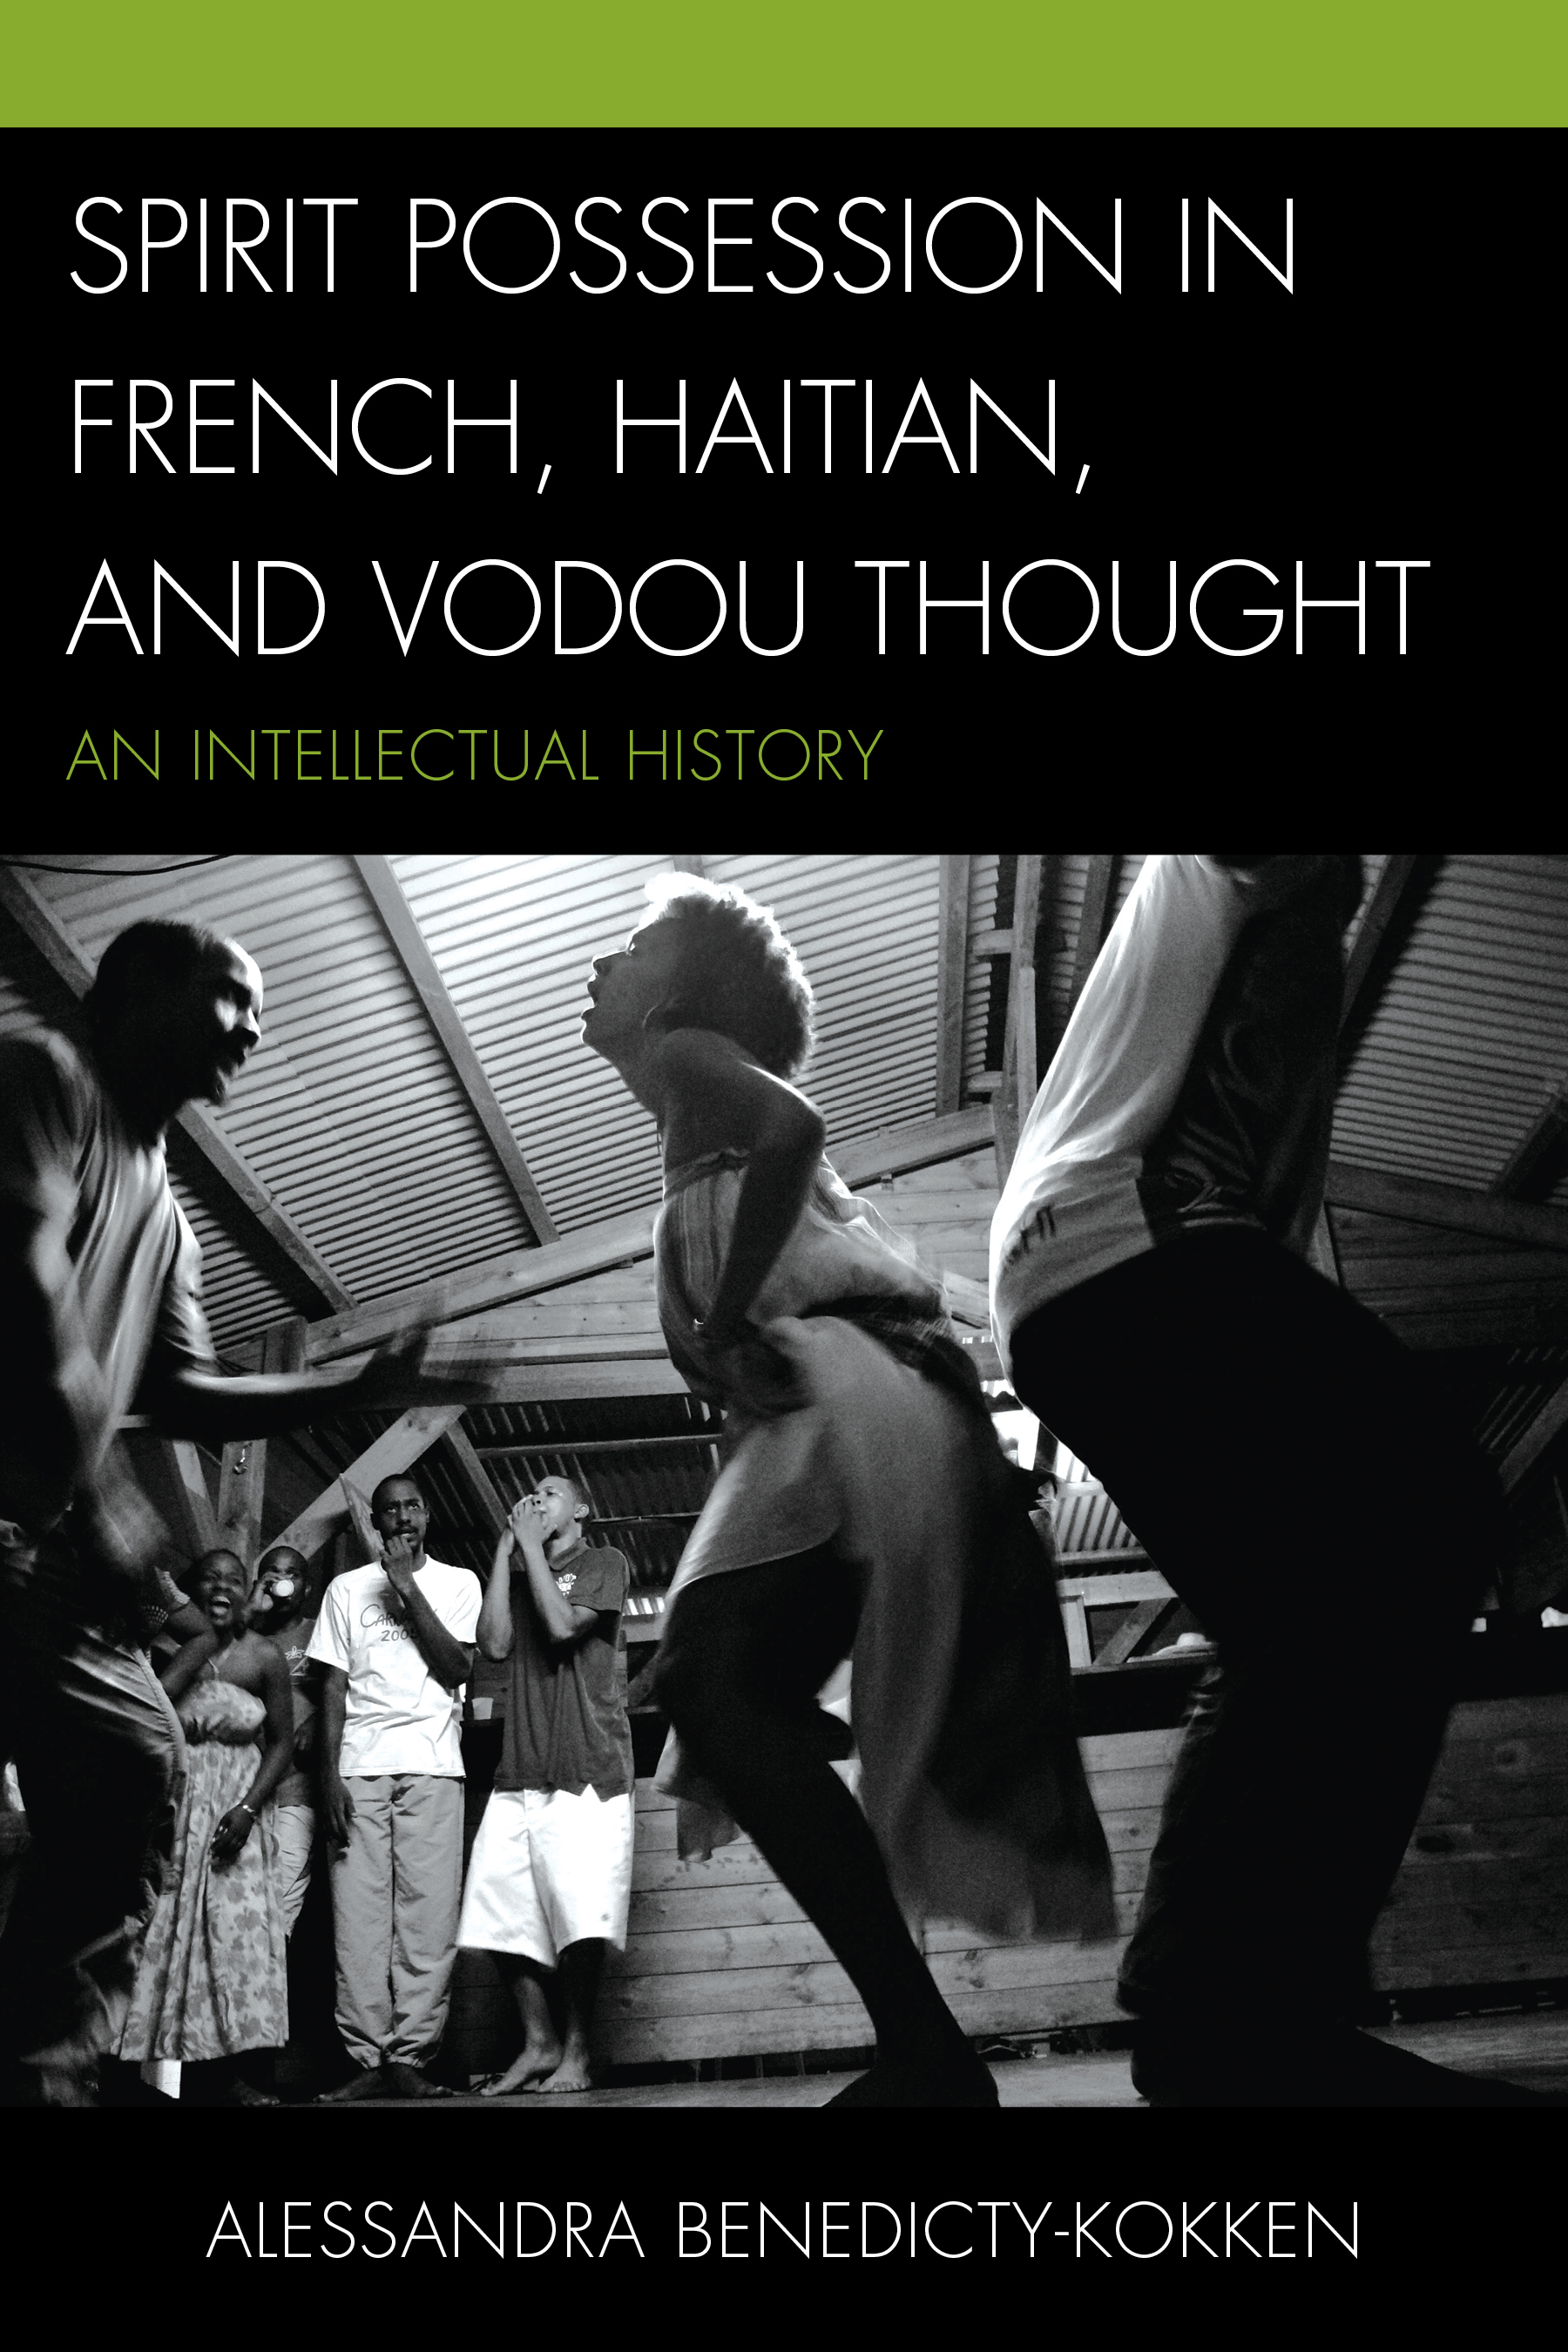 Spirit Possession in French, Haitian, and Vodou Thought: An Intellectual History